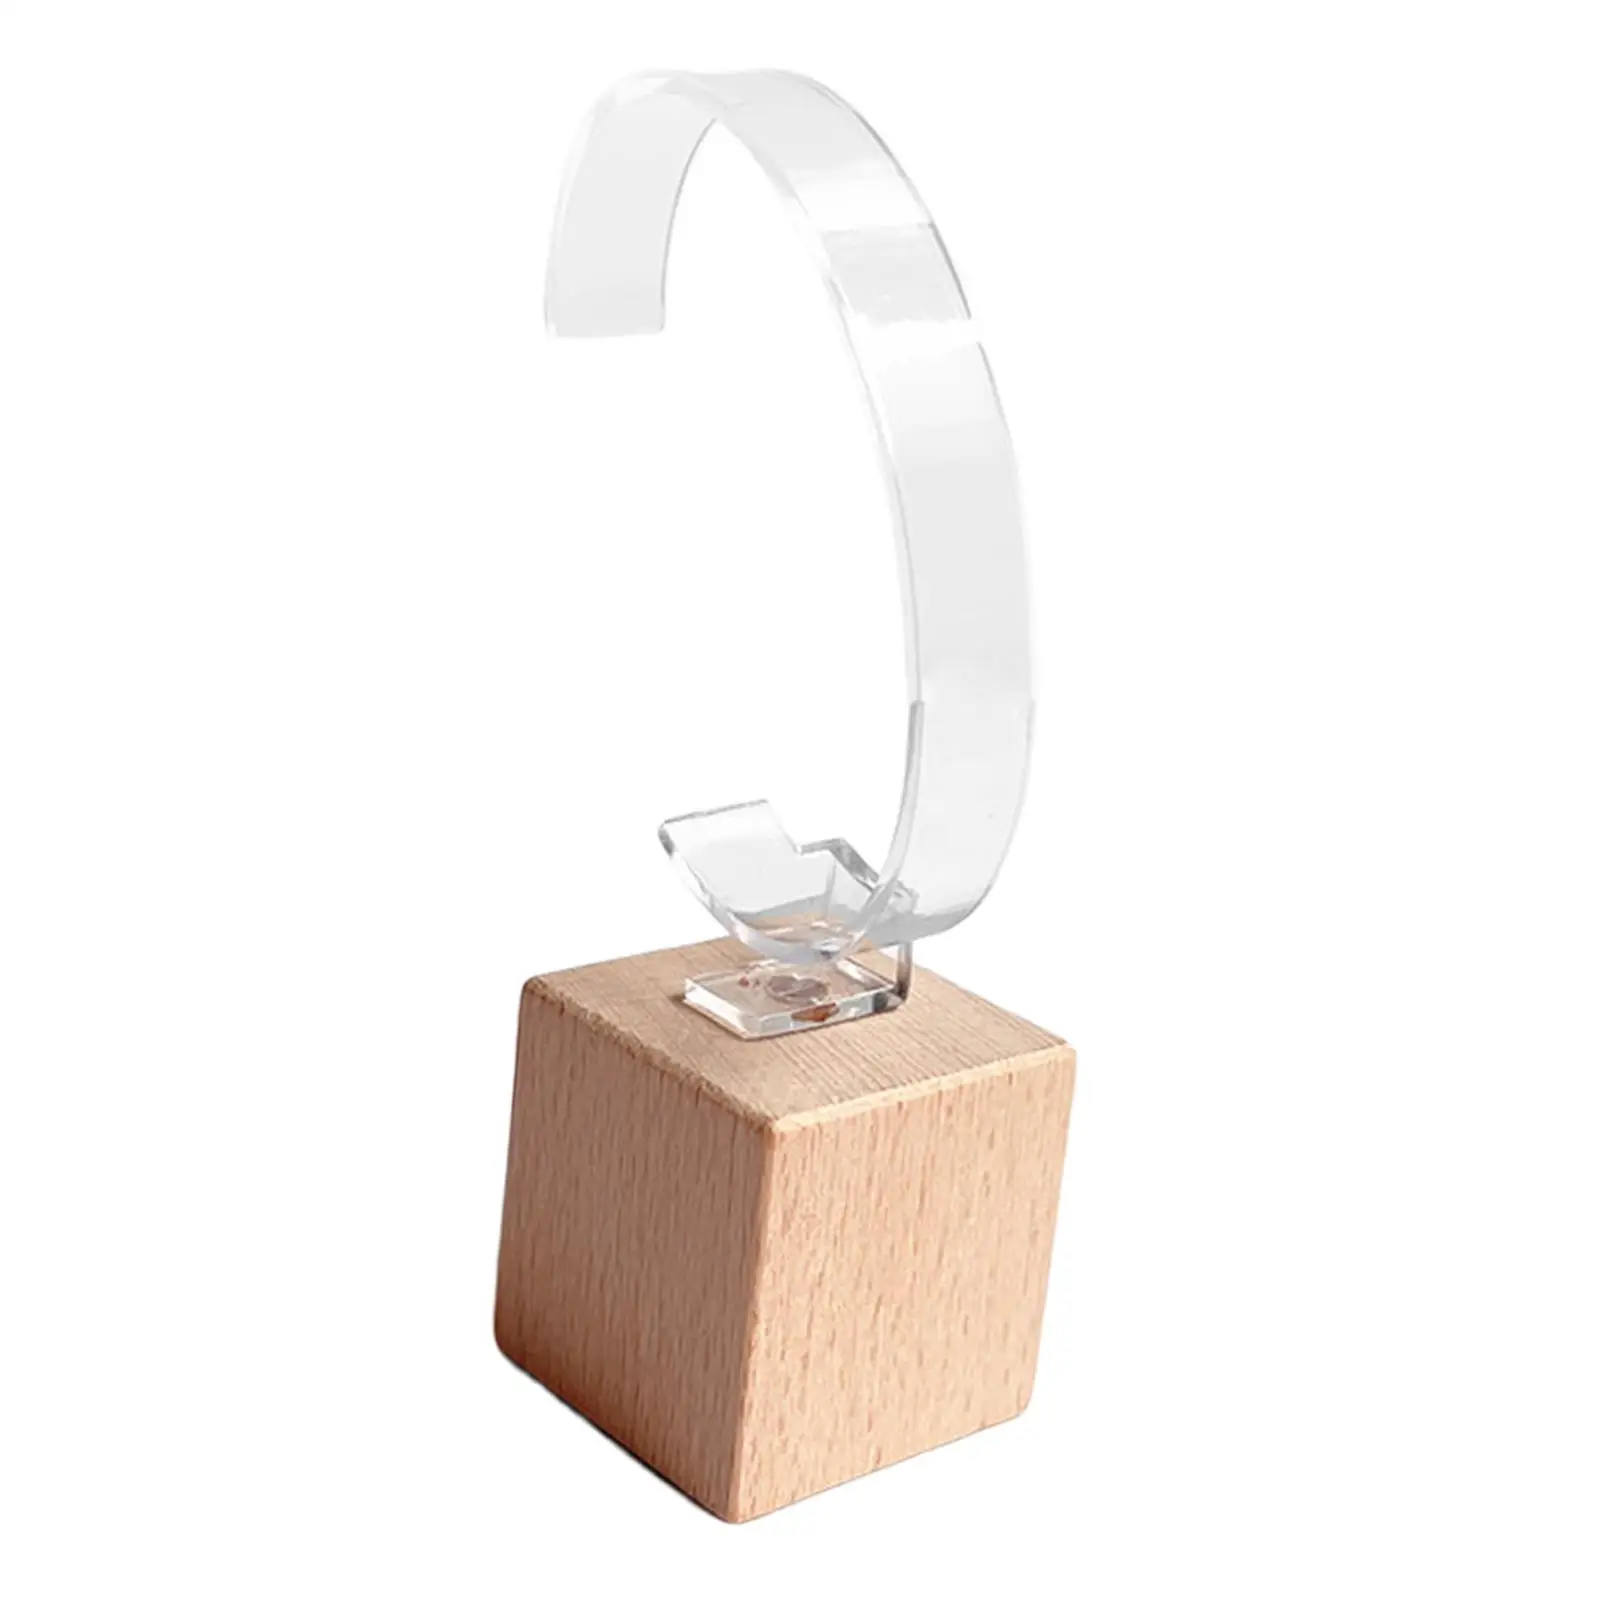 Multifunctional Watch Display Stand Wooden Base Jewelry Bracelet Bangle Display Rack Wrist Watch Holder for Retail Sales Counter